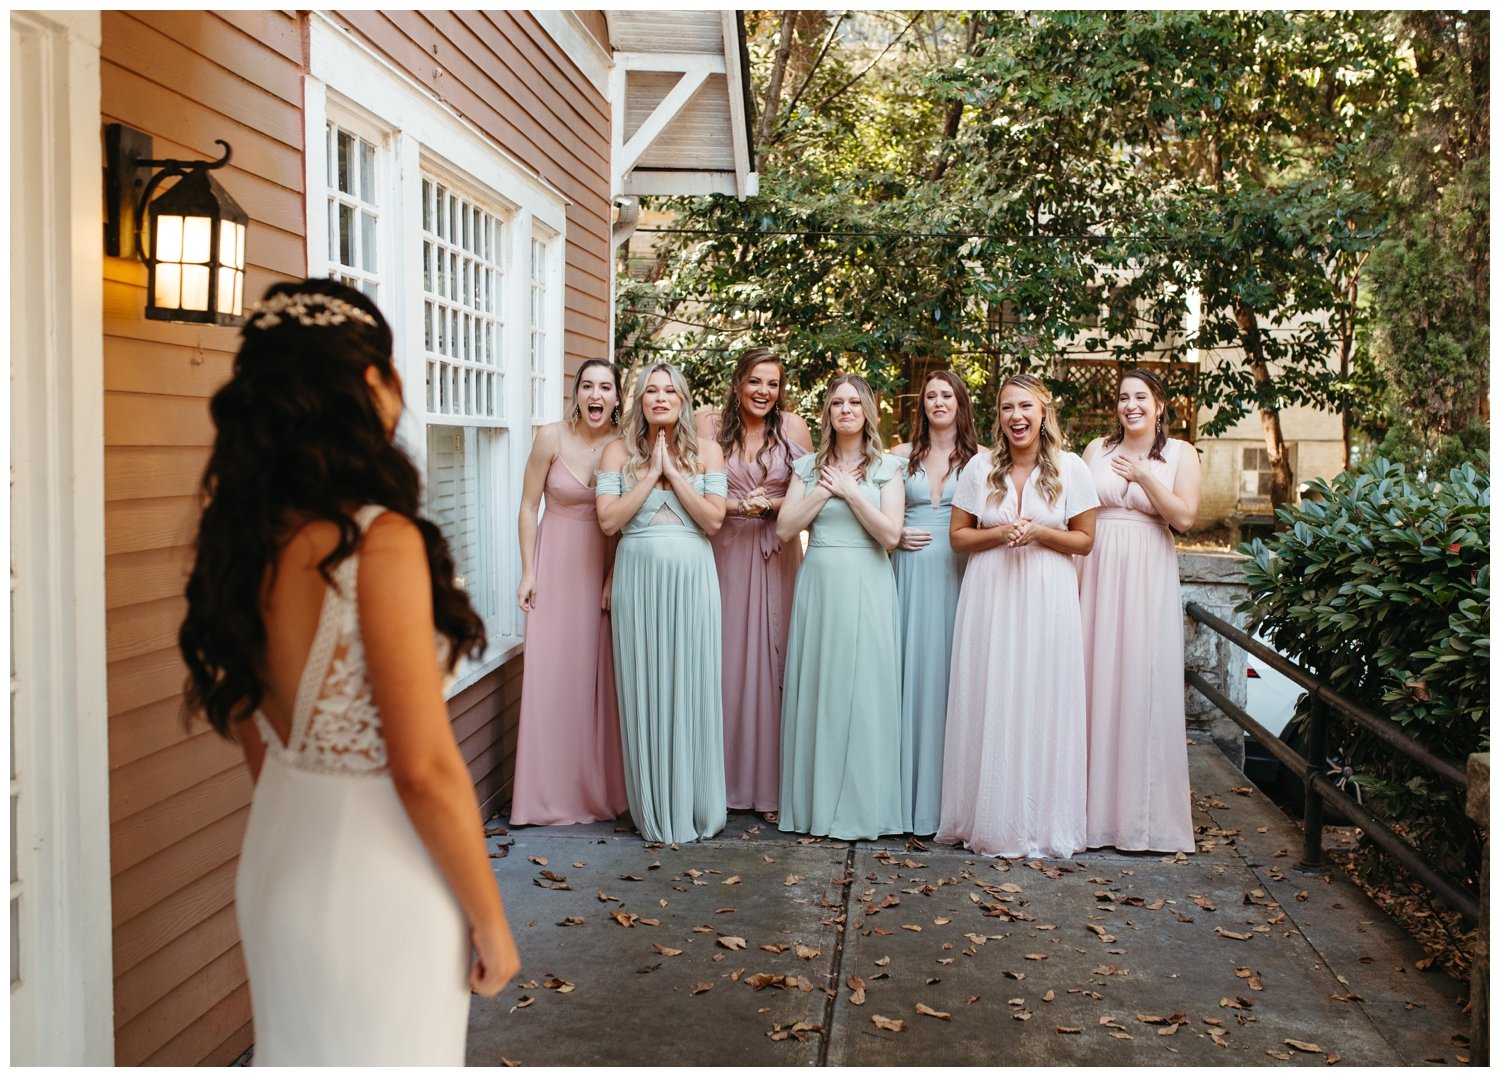 The bride shows the bridesmaids her dress for the Ponce City Market wedding